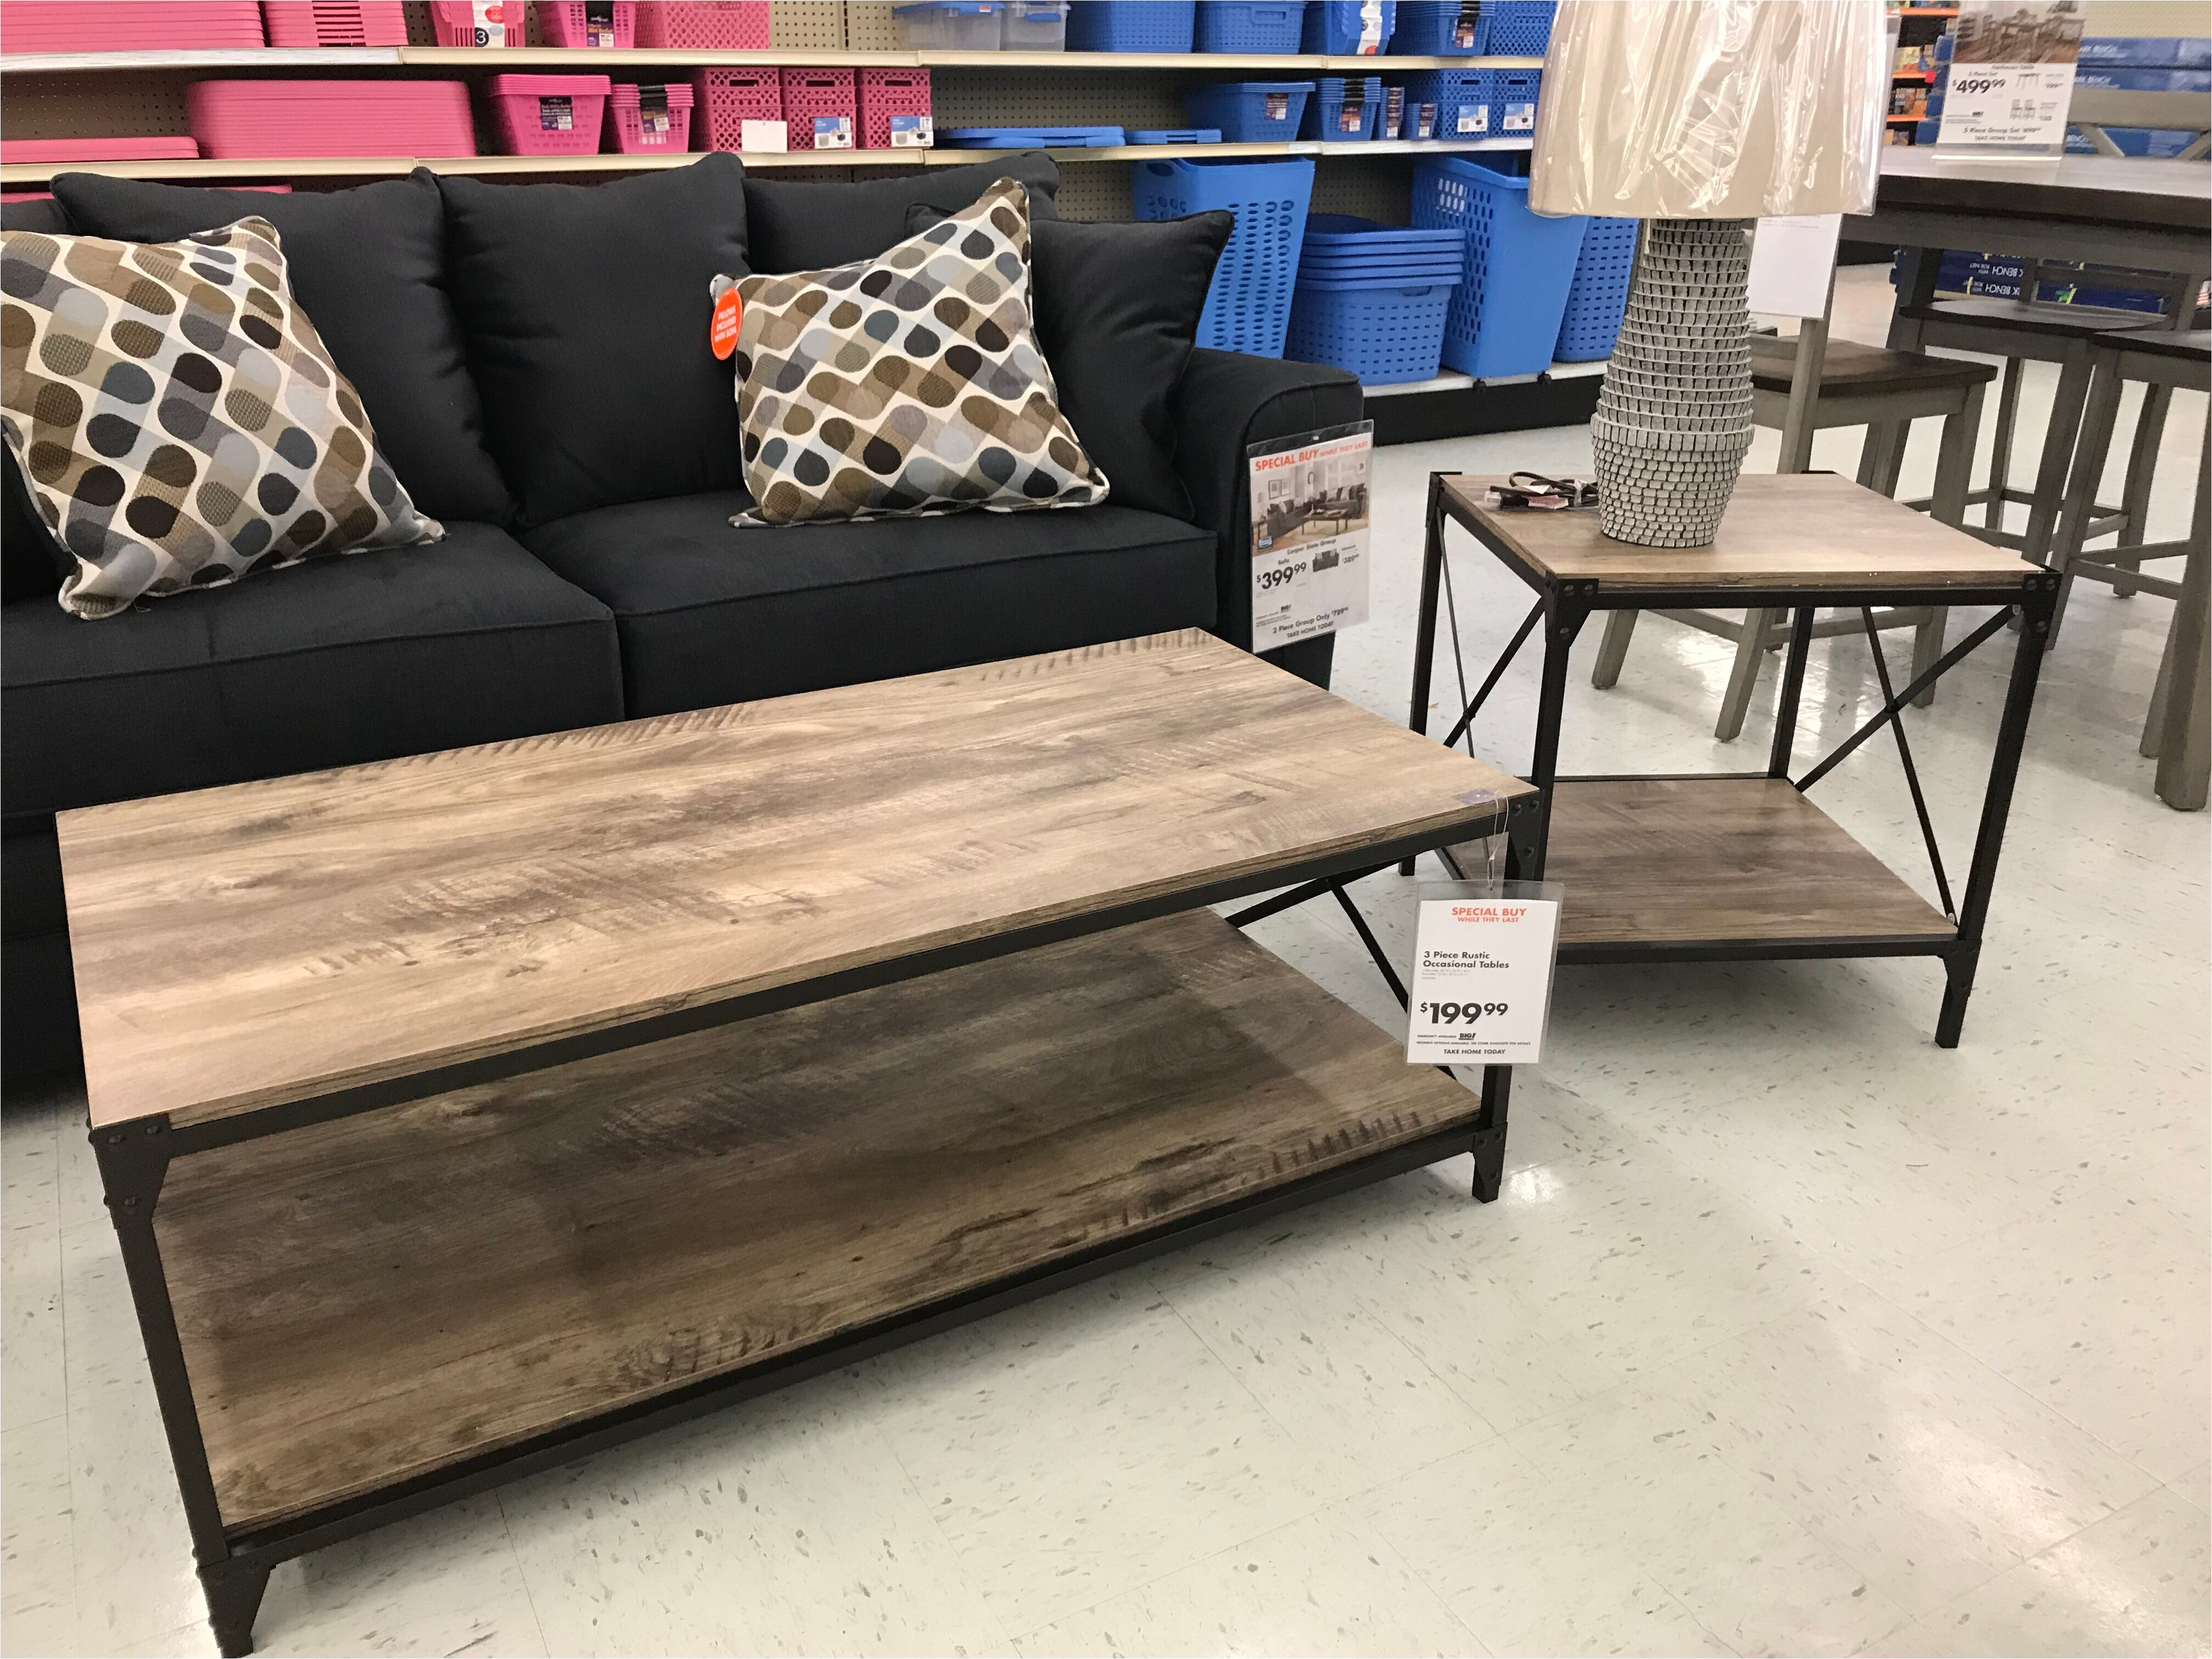 100 off 500 at big lots save on sectionals farmhouse furniture furniture coffee table